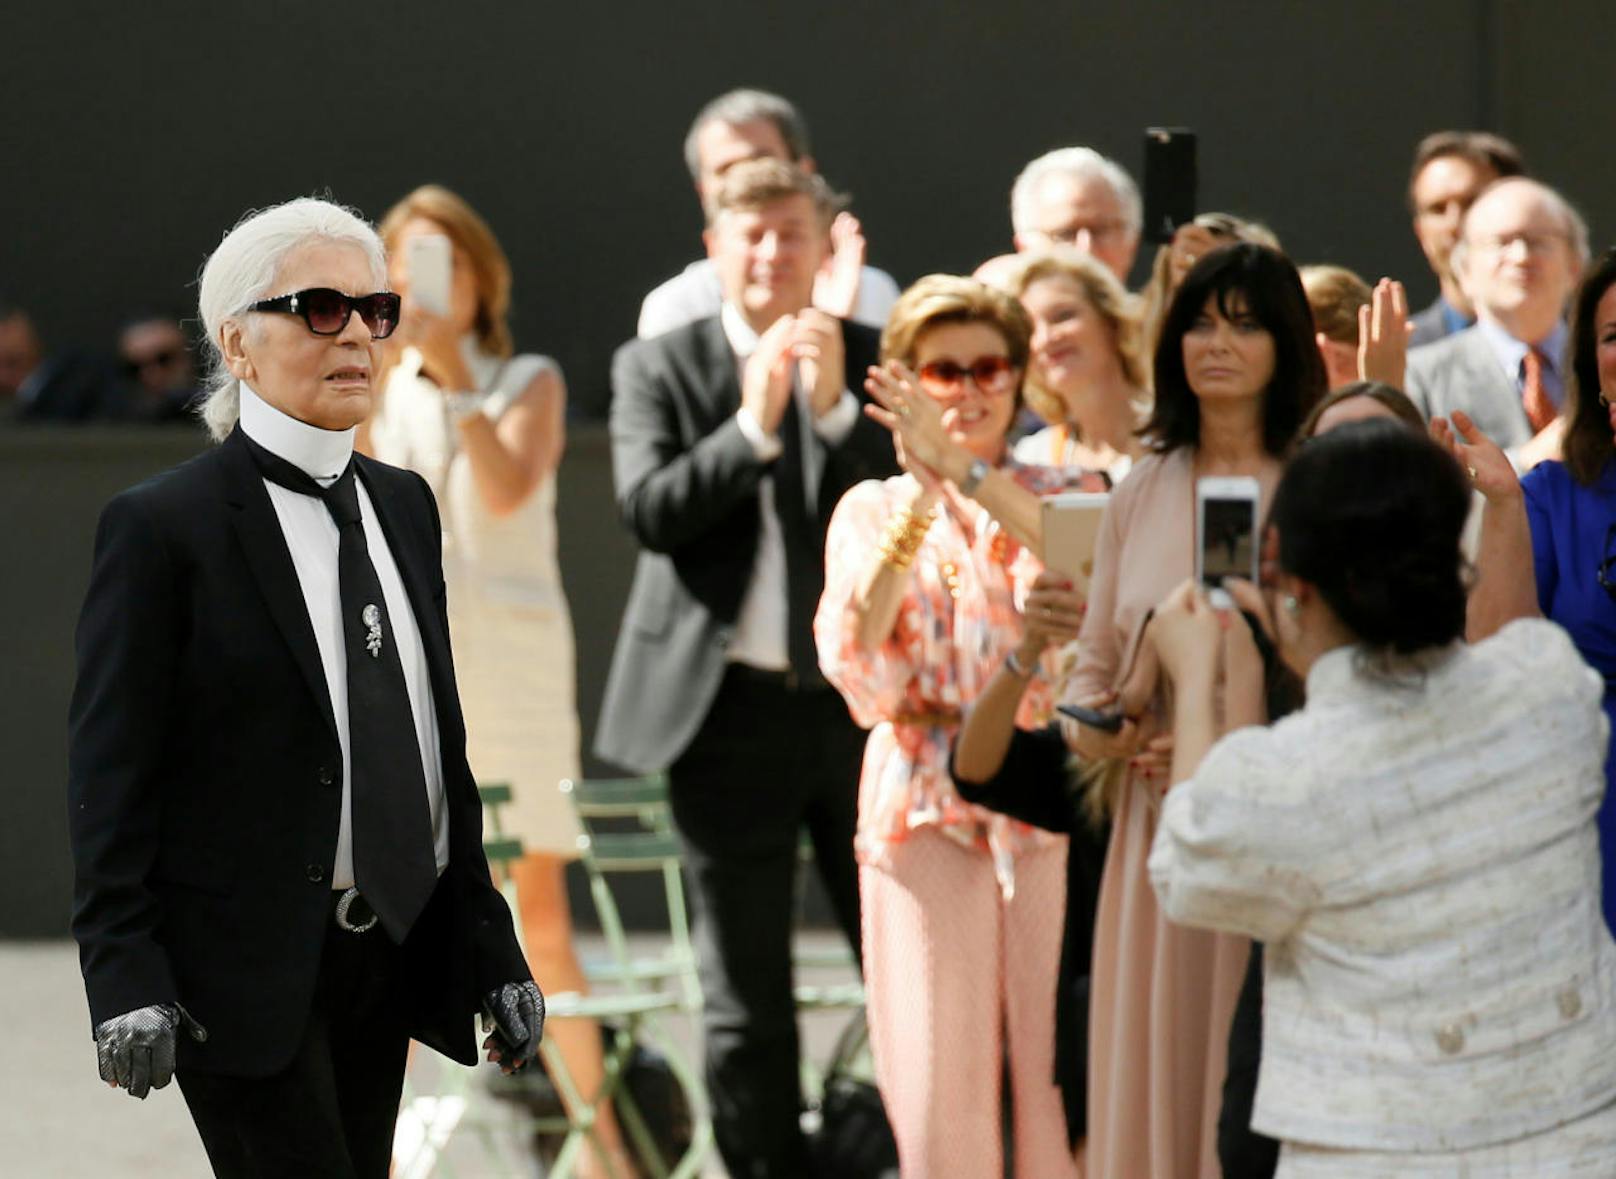 German designer Karl Lagerfeld appears at the end of his Haute Couture Fall/Winter 2017/2018 collection for fashion house Chanel in Paris, France, July 4, 2017. REUTERS/Gonzalo Fuentes - RTX39YIE